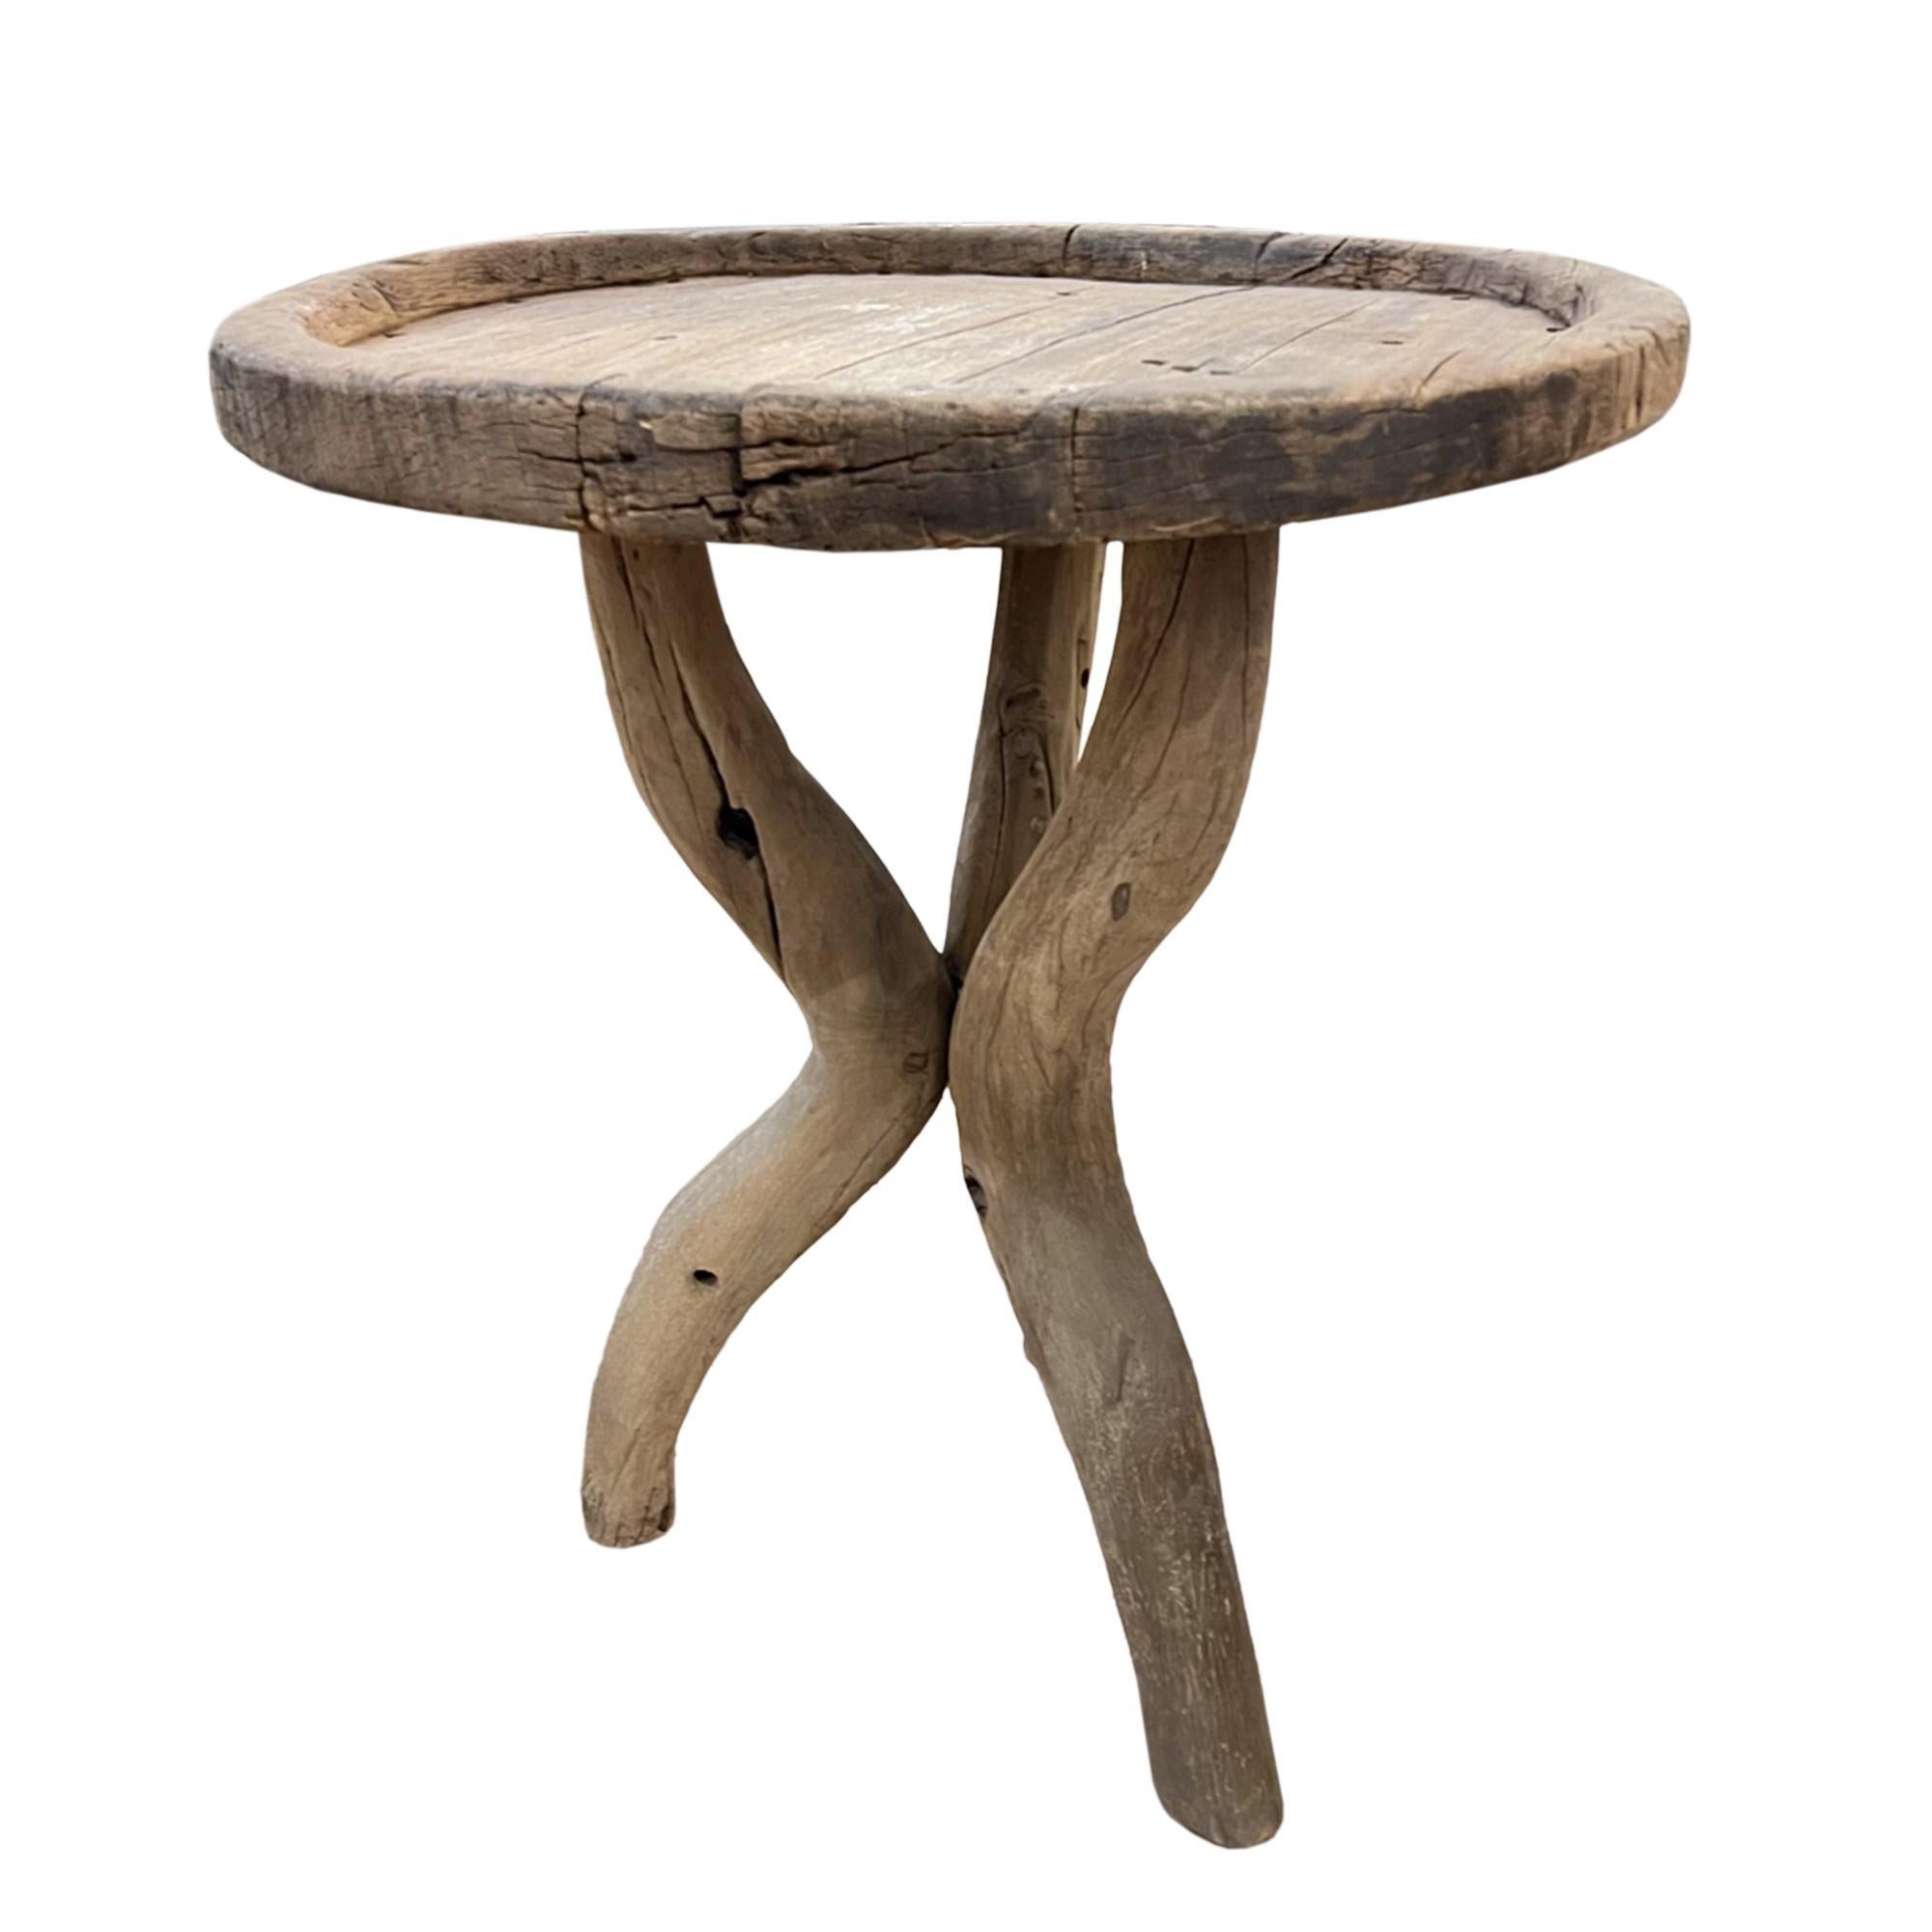 Hand-Crafted Rustic Side Table With Driftwood Legs For Sale